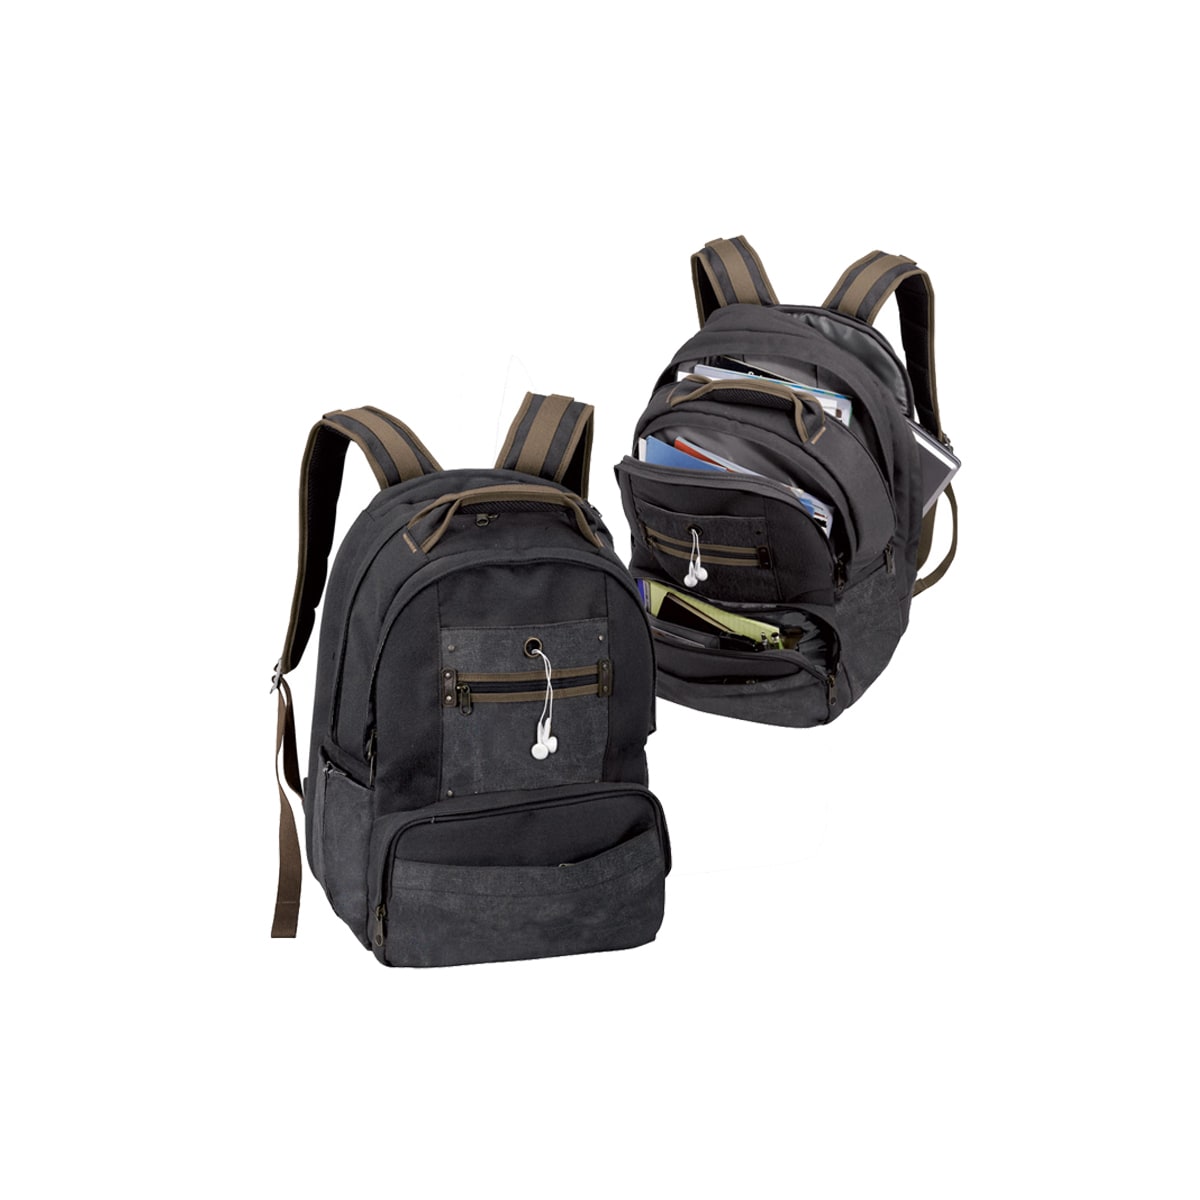 Impact Computer Backpack - image 2 of 4